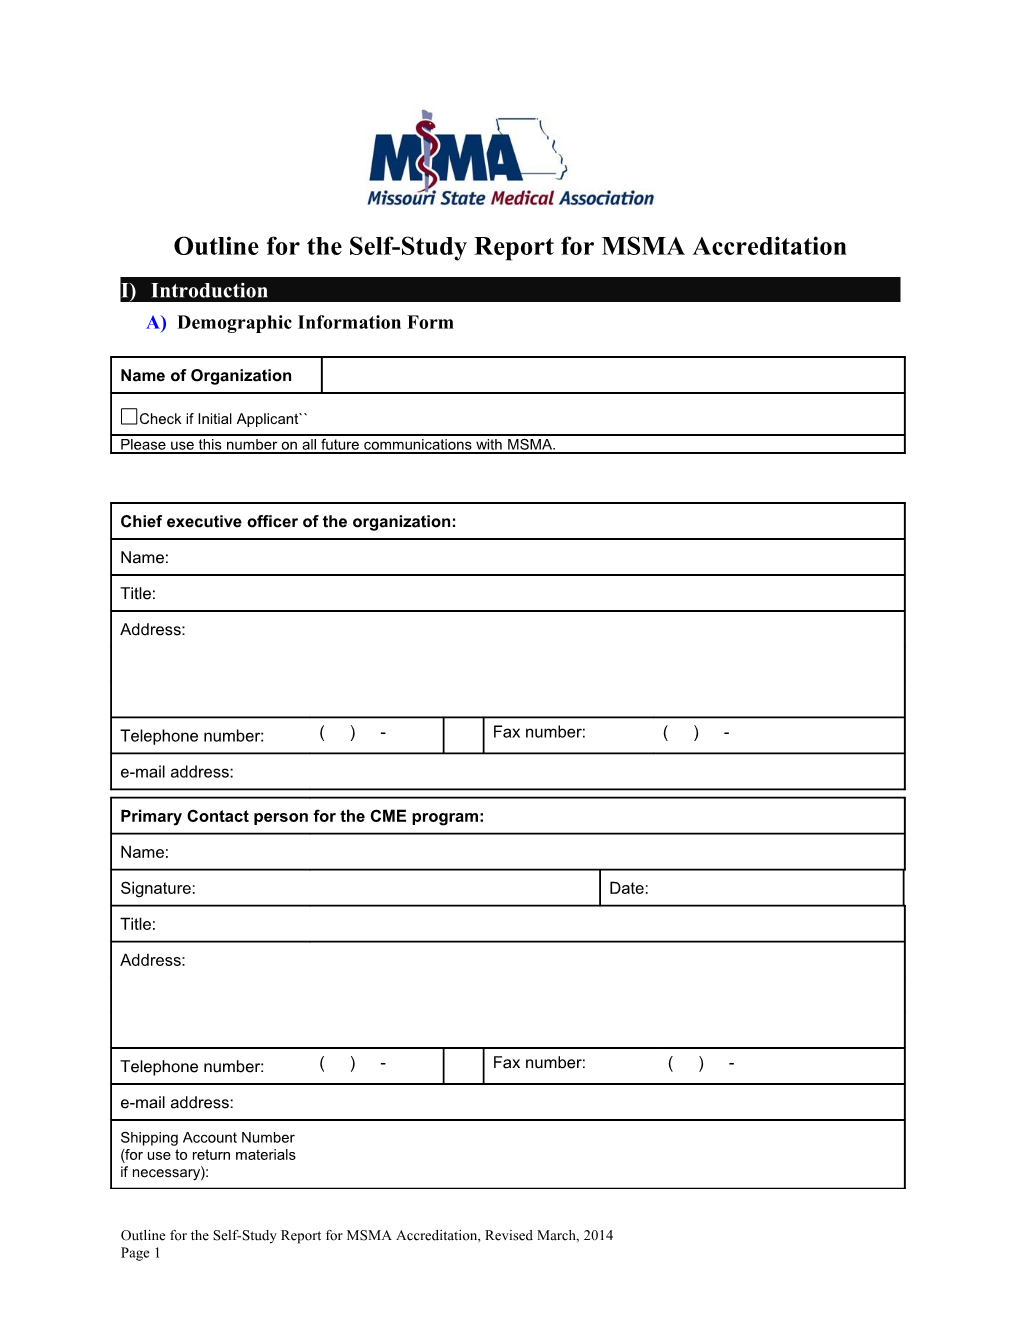 Outline for the Self-Study Report for MSMA Accreditation